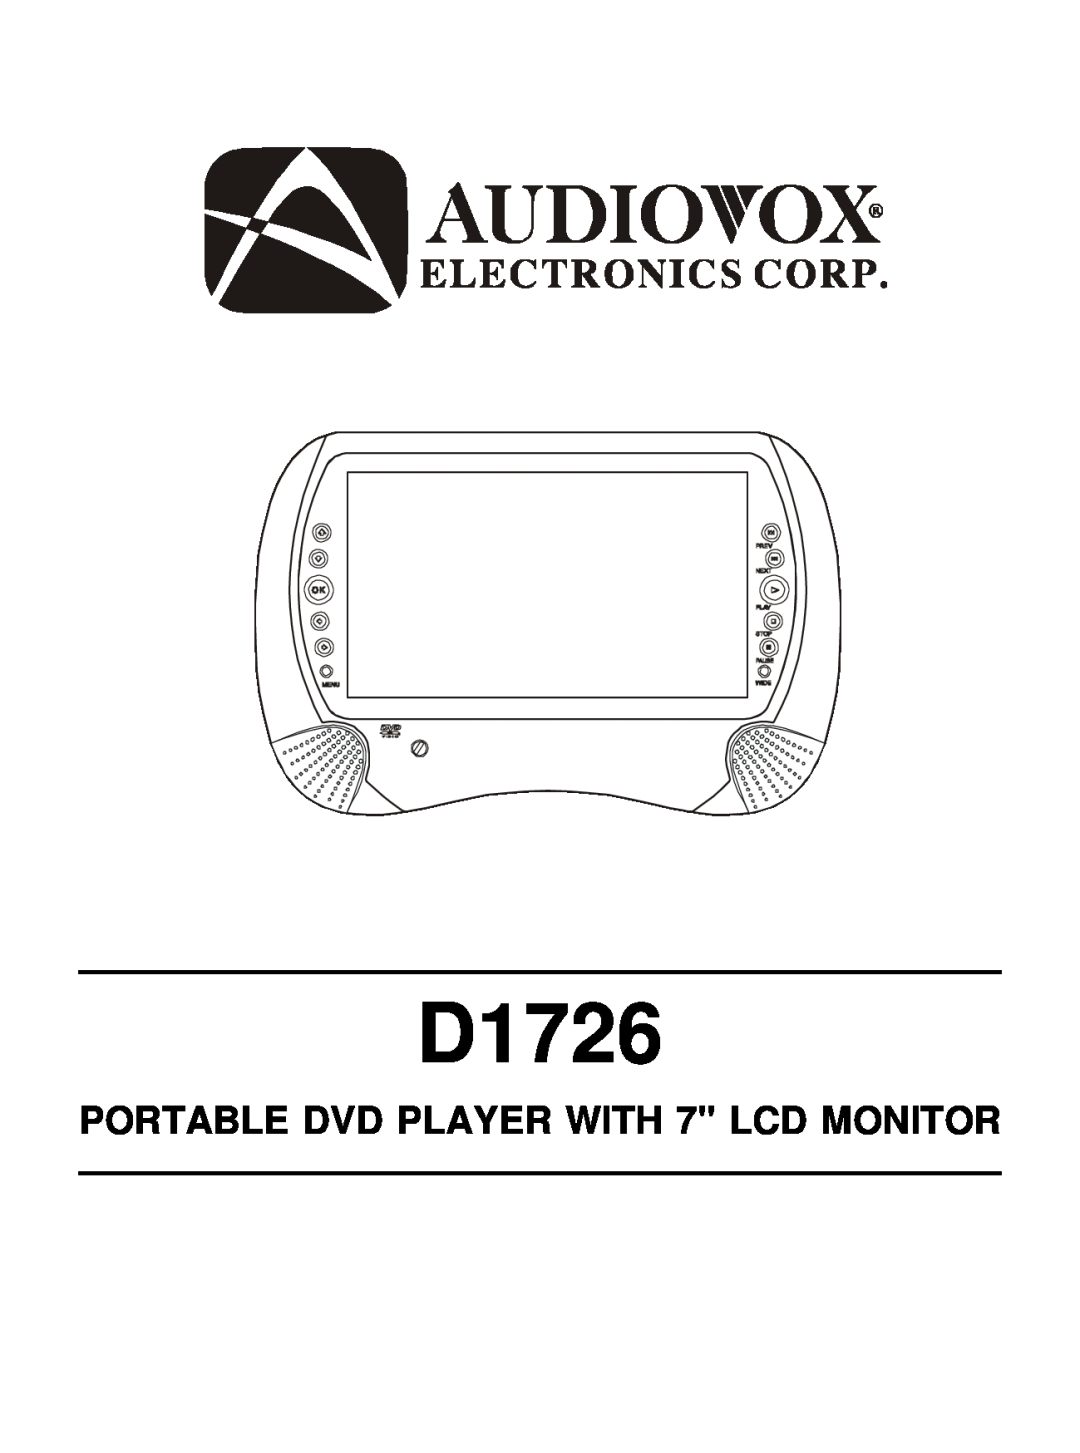 Audiovox D1726 manual PORTABLE DVD PLAYER WITH 7 LCD MONITOR 